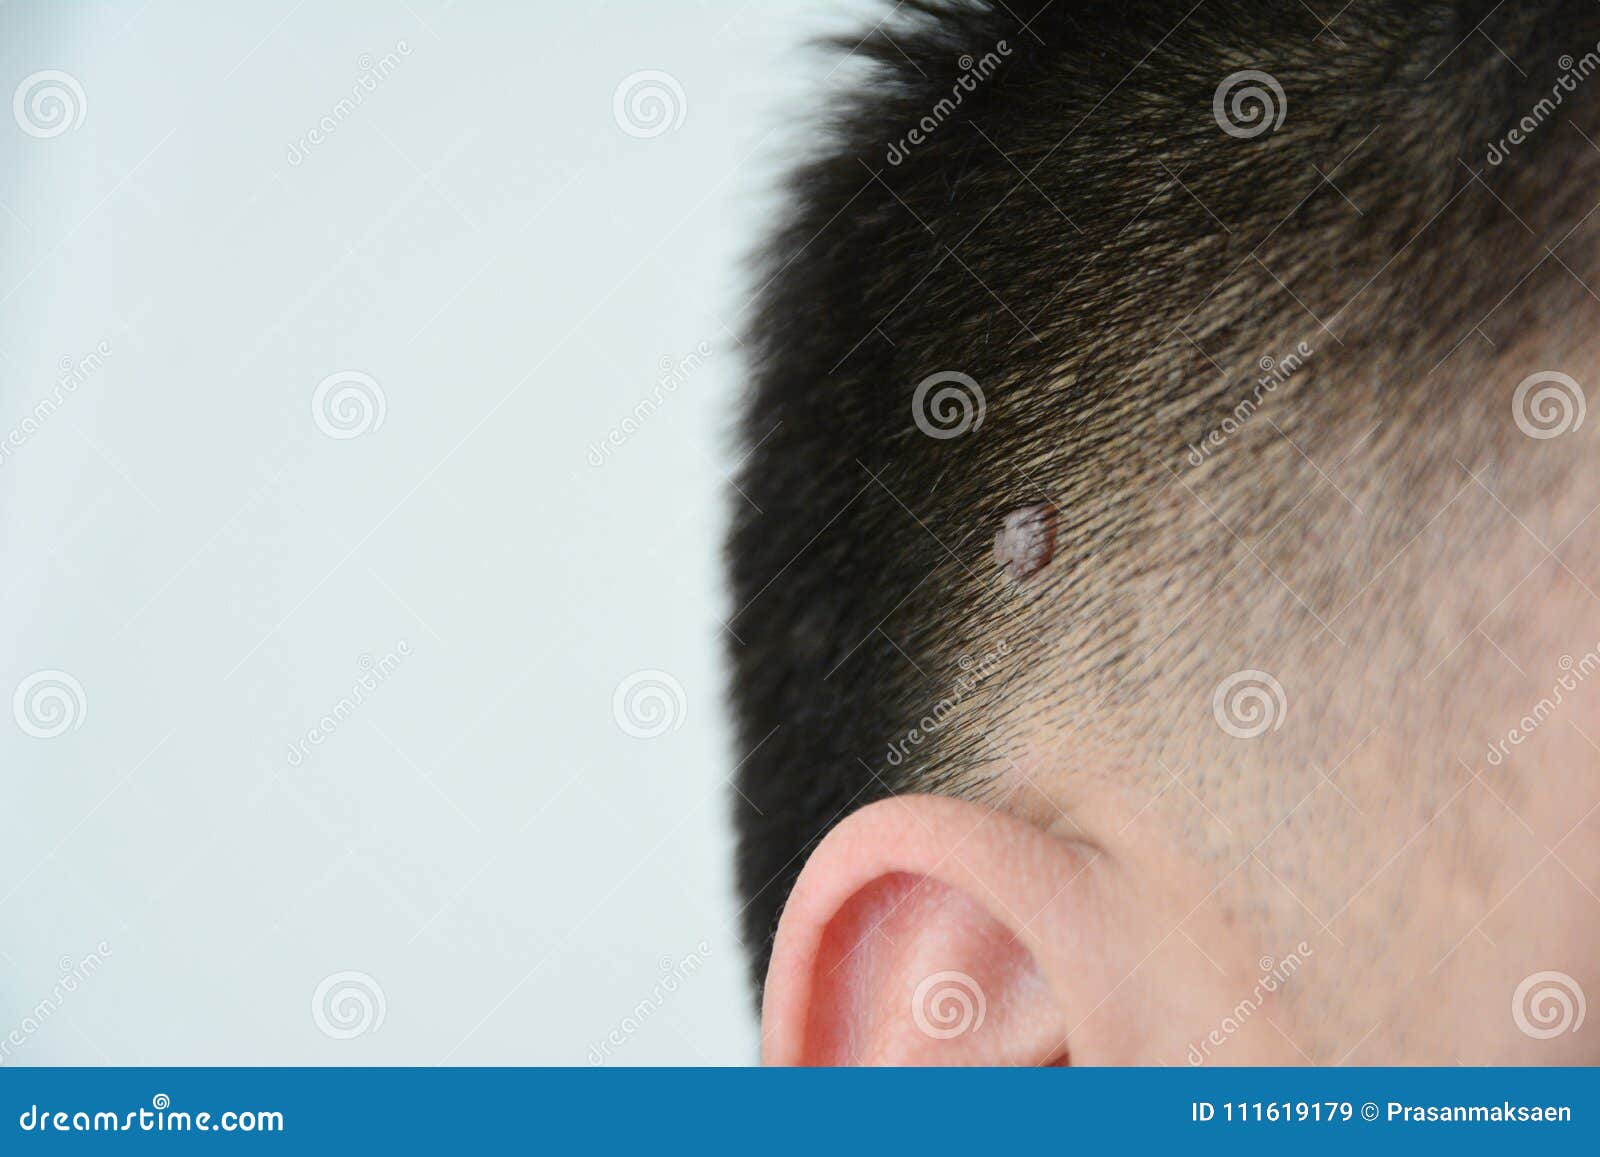 Mole or wart stock image. Image of danger, isolated - 111619179